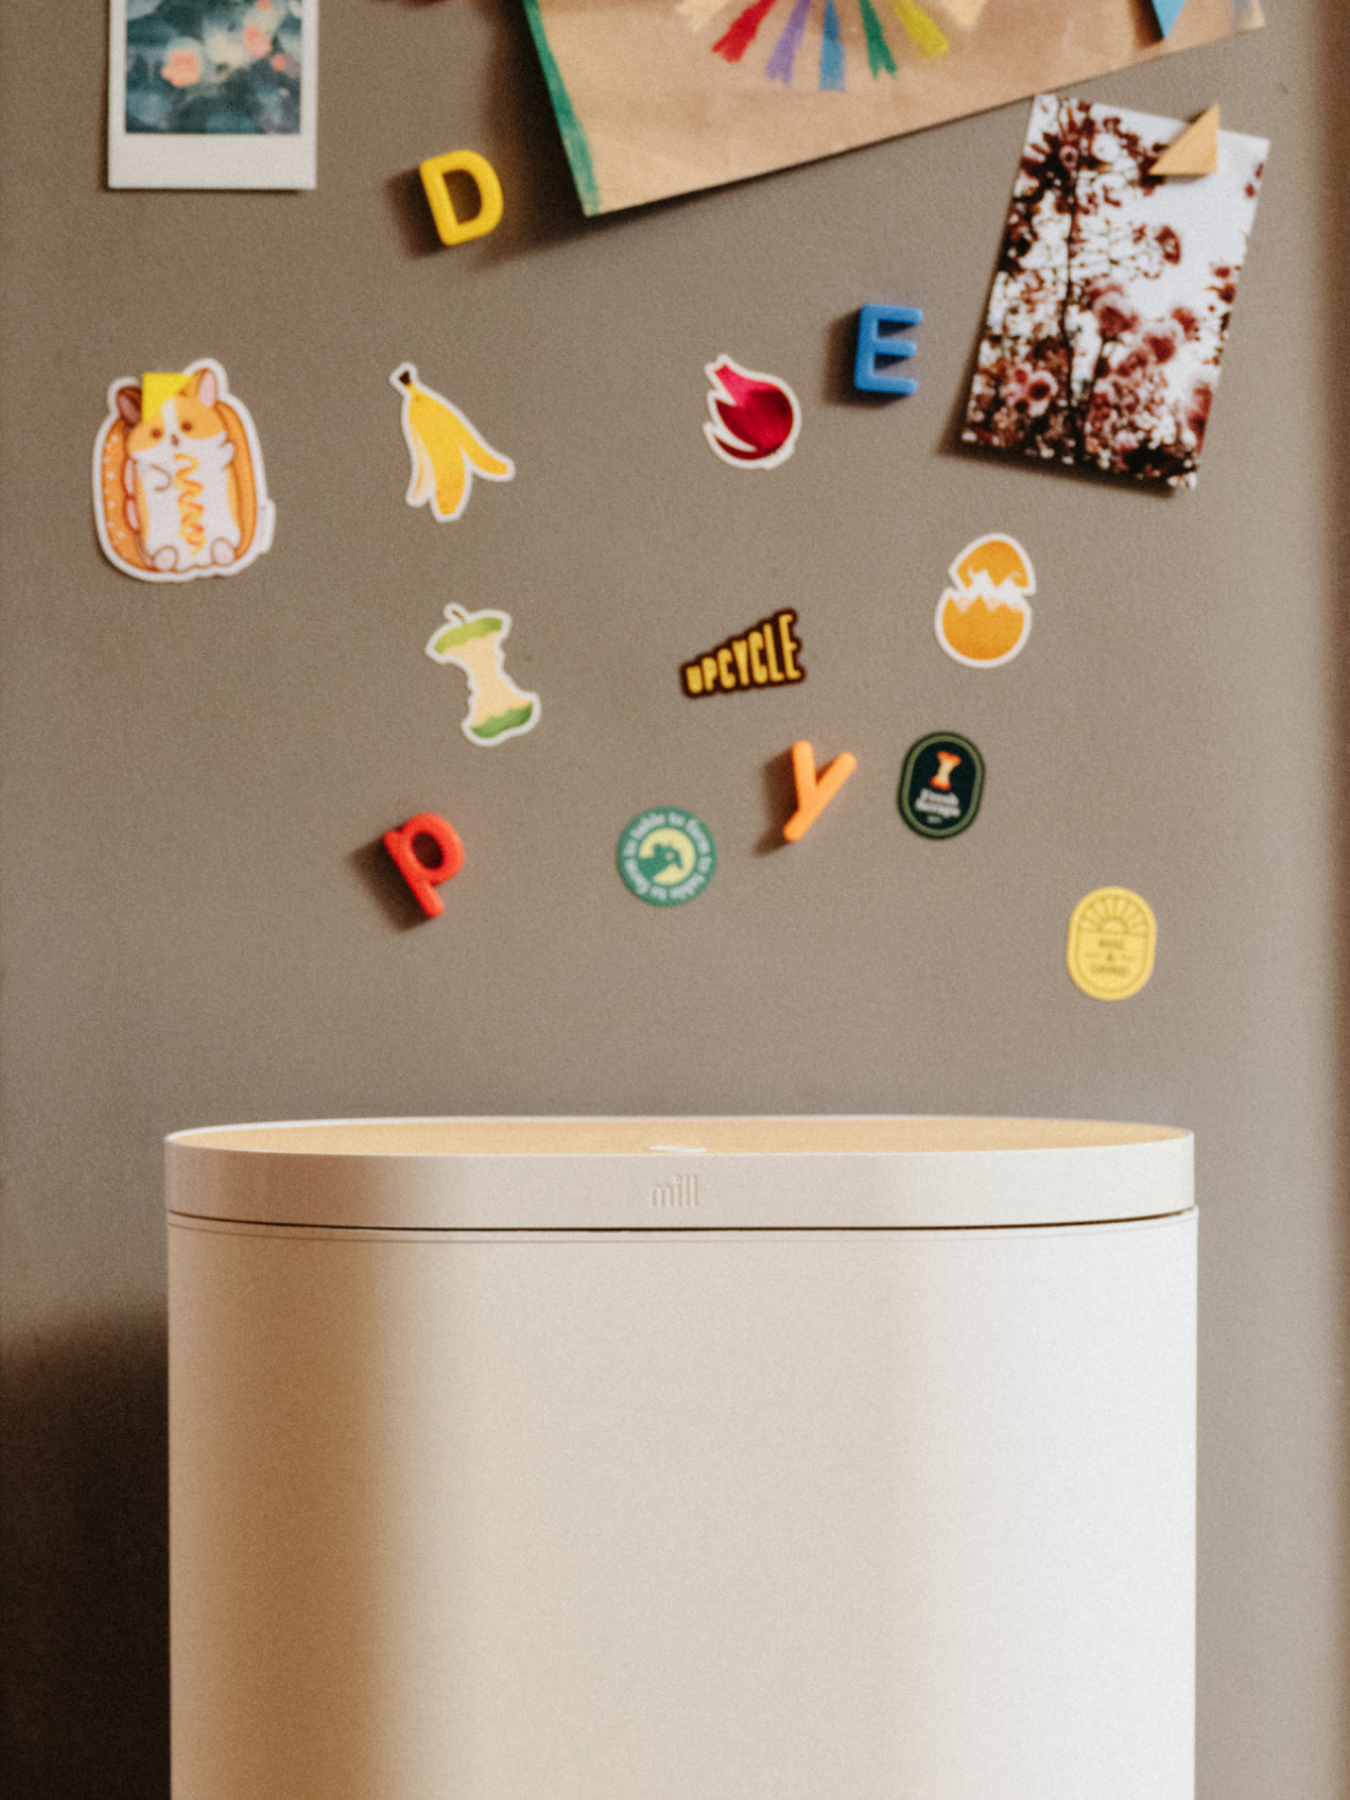 A Mill kitchen bin is viewed against a refrigerator decorated with magnets.